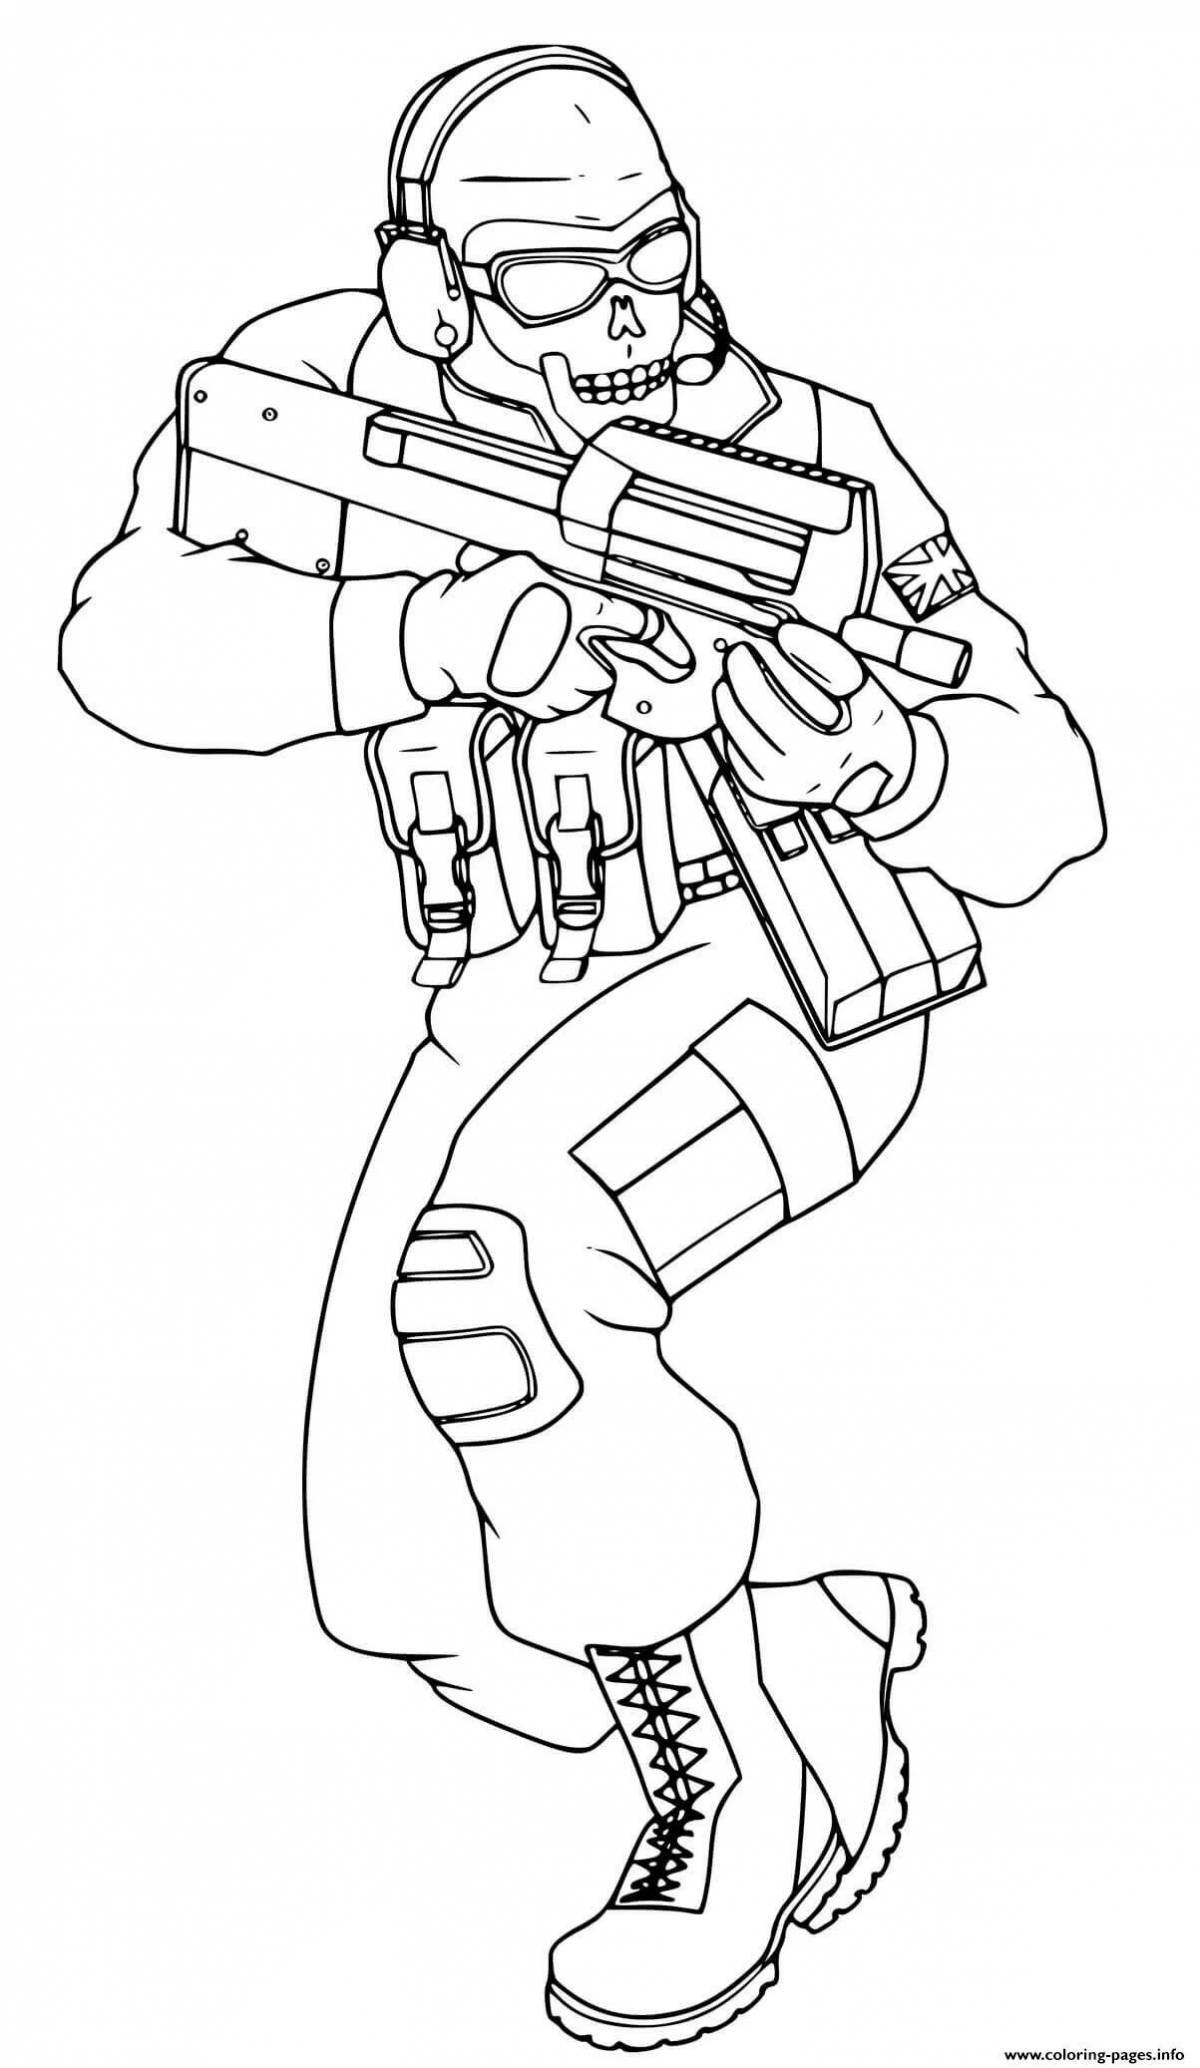 Colorful standoff 2 logo coloring page